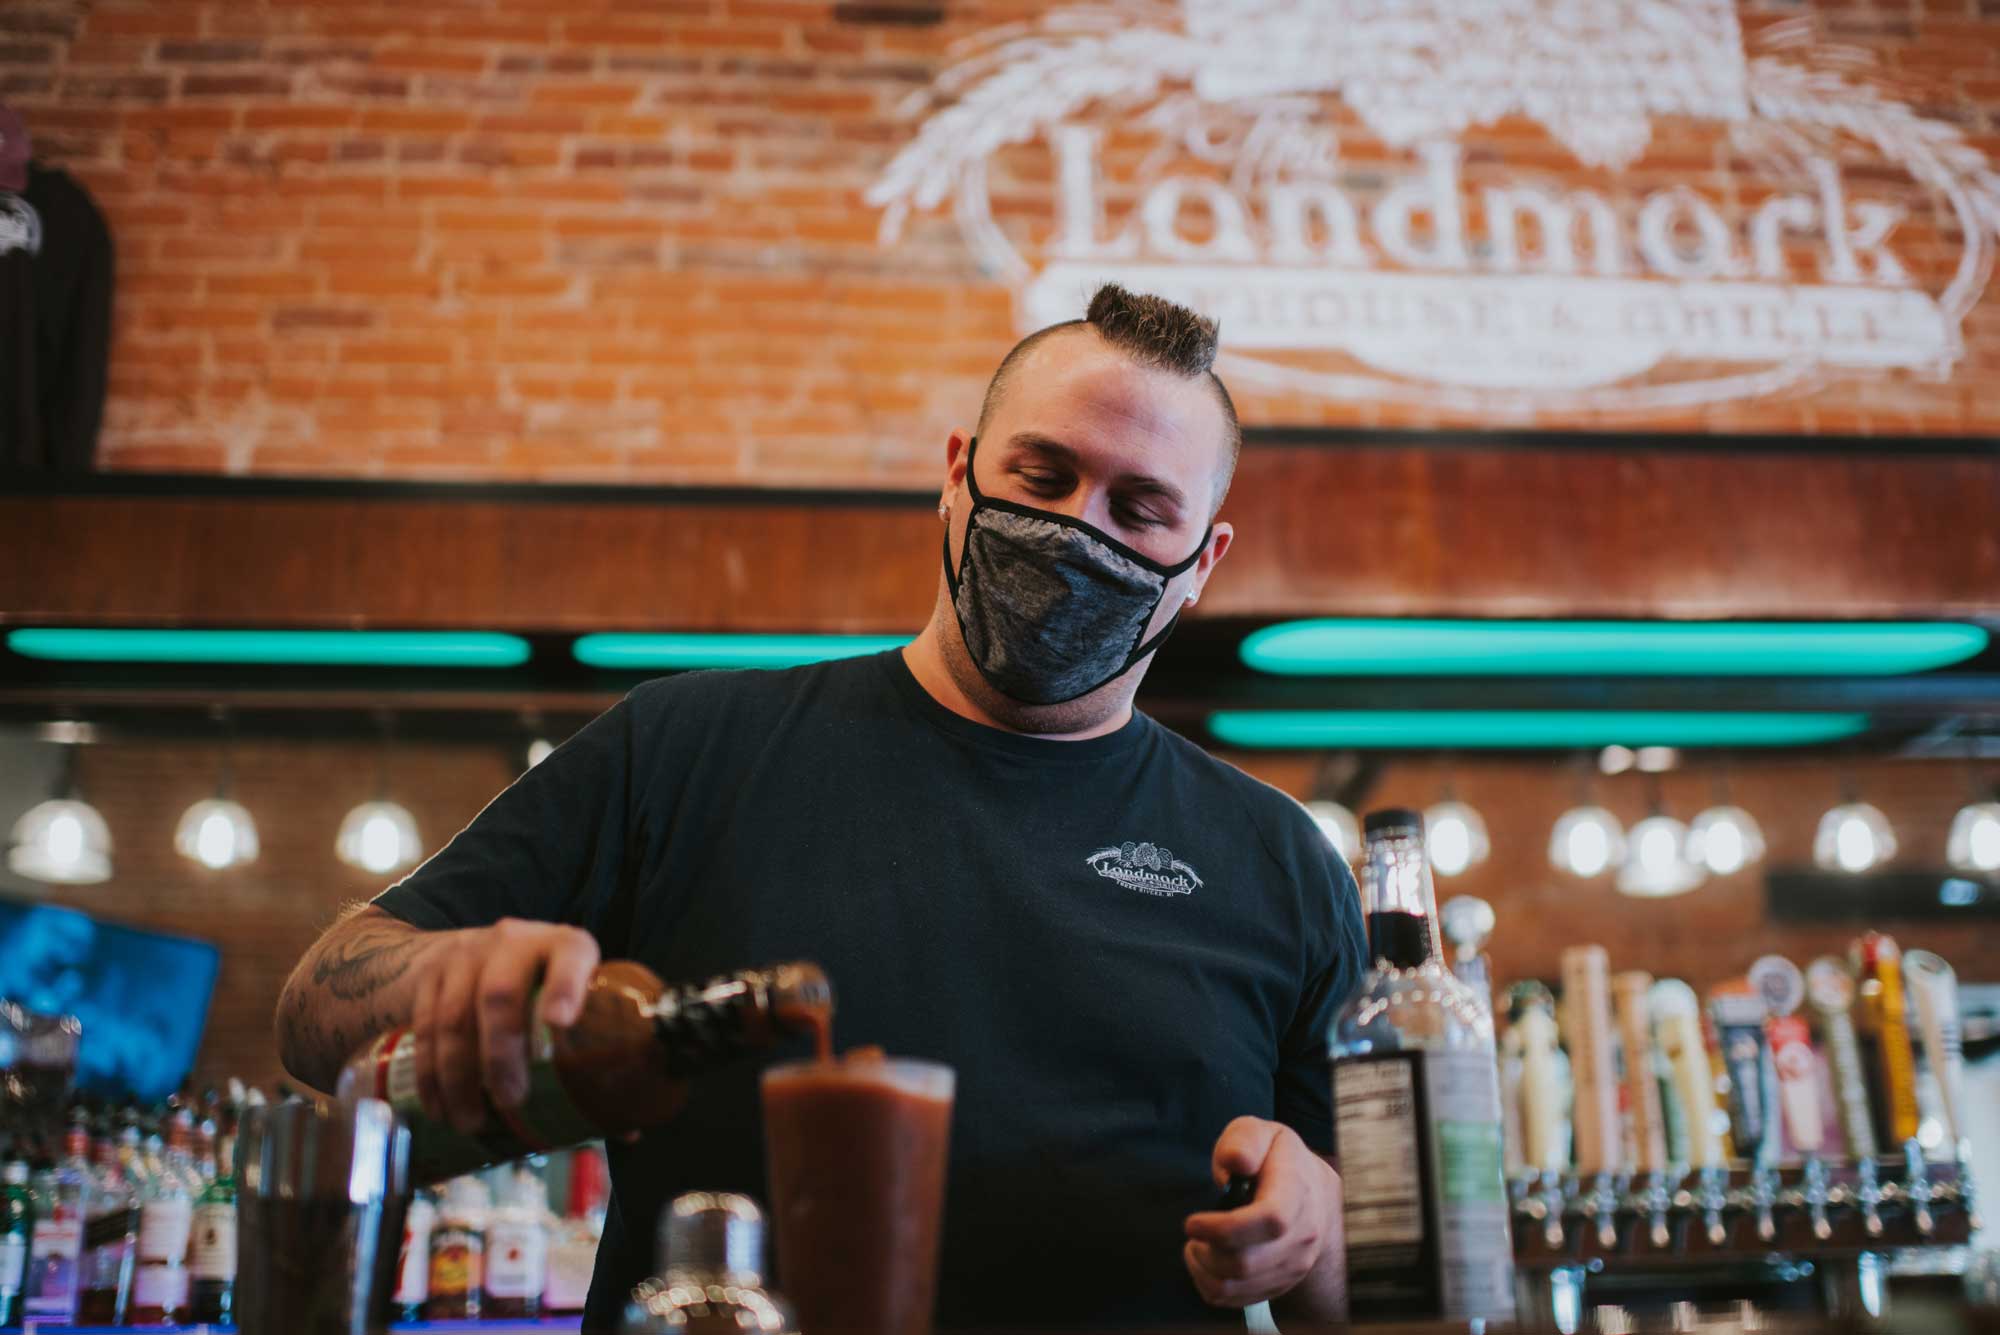 Landmark Taphouse and Grille bartender pouring a drink